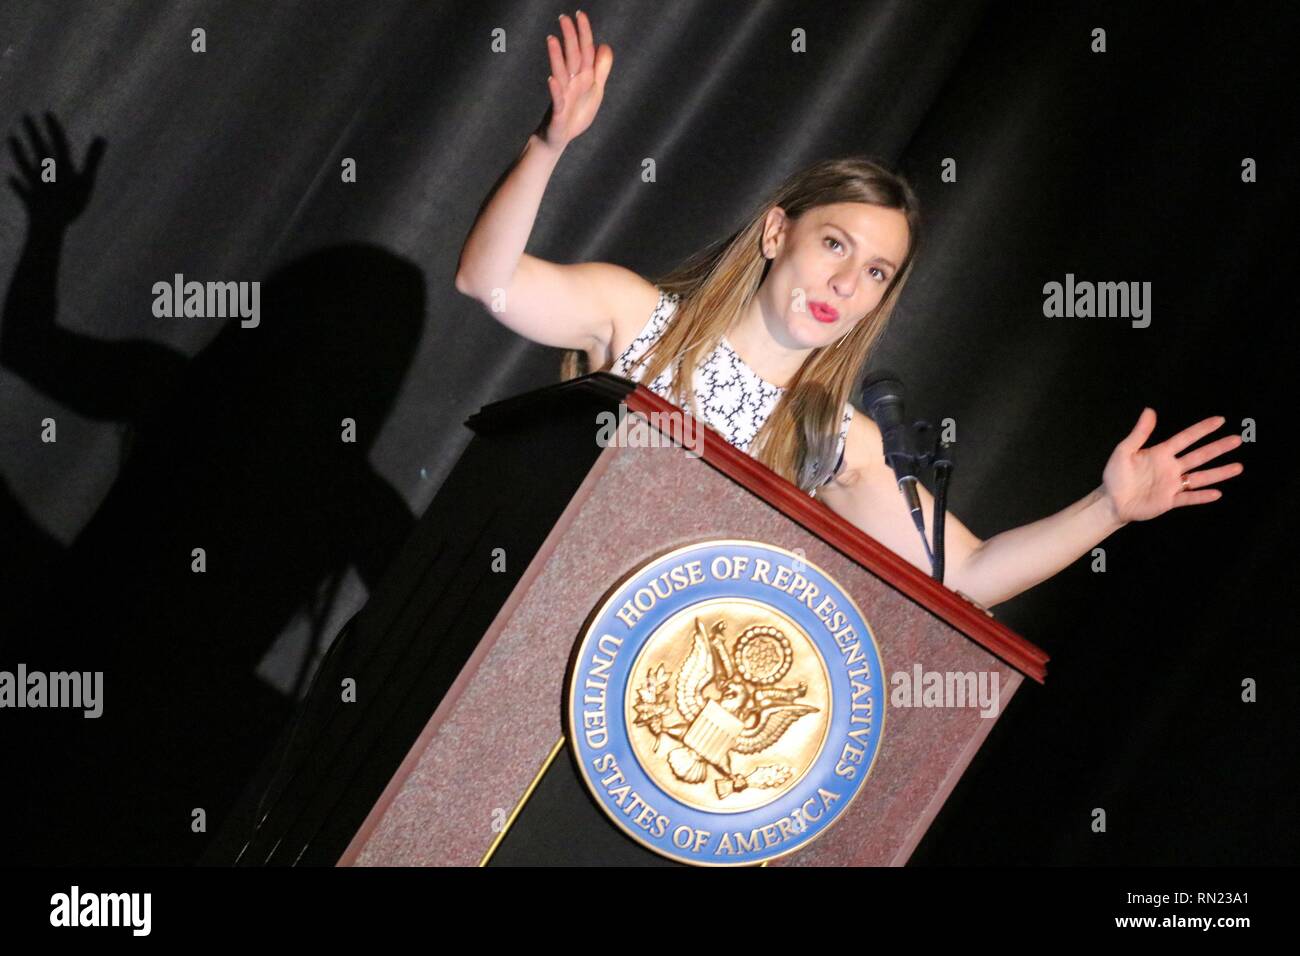 New York City, New York, USA. 16th Feb, 2019. Freshman U.S. Congresswoman Alexandria Ocasio-Cortez (D-NY) has delivered her inaugural address in her Bronx home district on 15 February 2019. The address was delayed because of the recent partial government shutdown. The ceremony featured a ceremonial swearing-in, an address to her constituents and featured speeches by local political leaders and massive display of support from her supporters. Pictured is freshman New York State Senator Alessandra Biaggi Credit: G. Ronald Lopez/ZUMA Wire/Alamy Live News Stock Photo